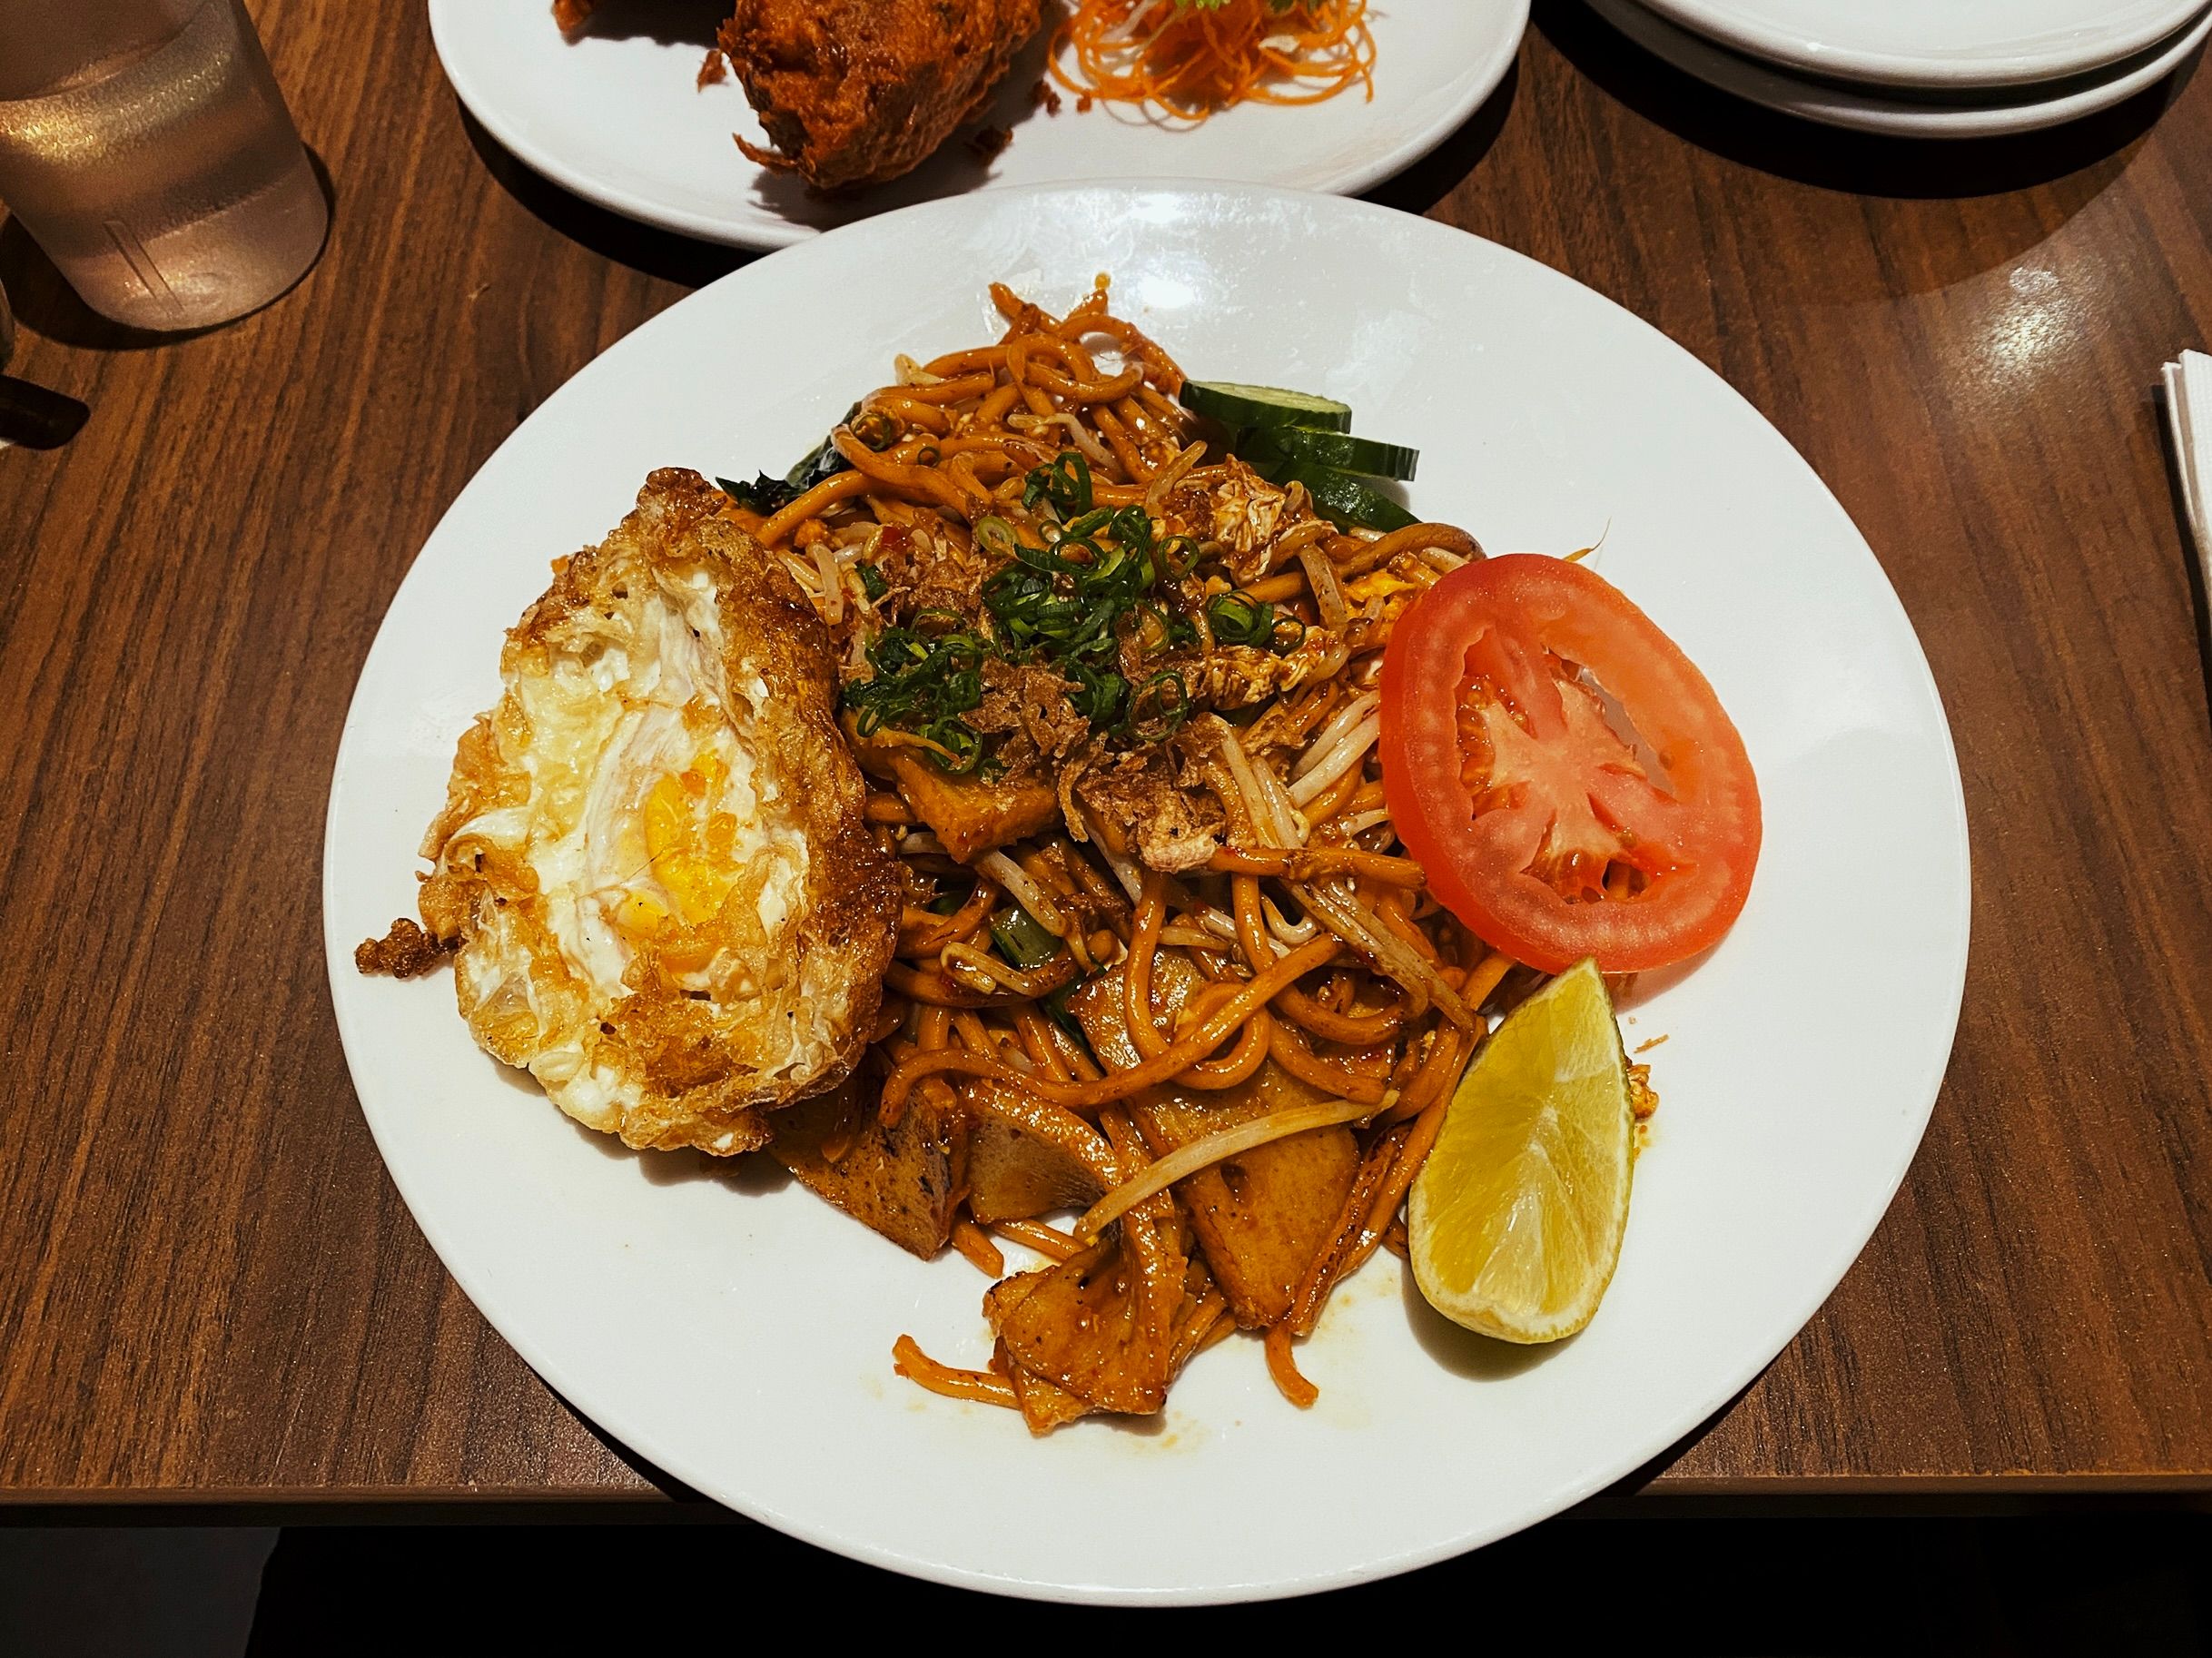 A photo of mee goreng on a plate with a fried egg on top.